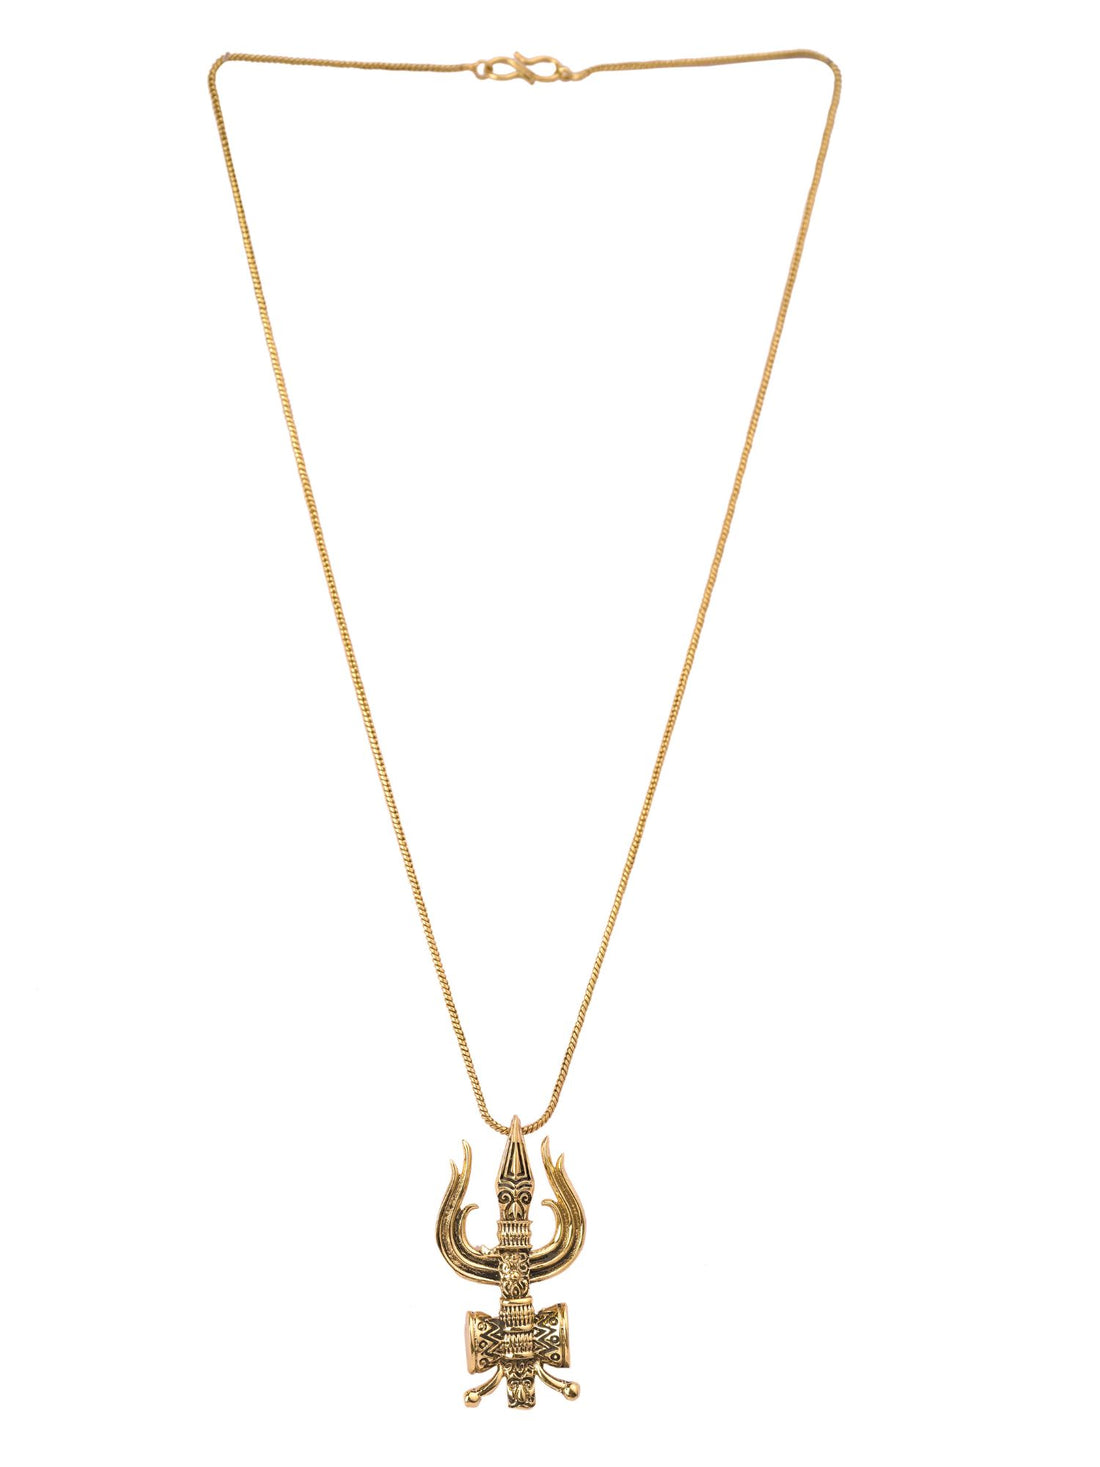 Studio One Love Trisula Brass-Plated Pendant With Chain